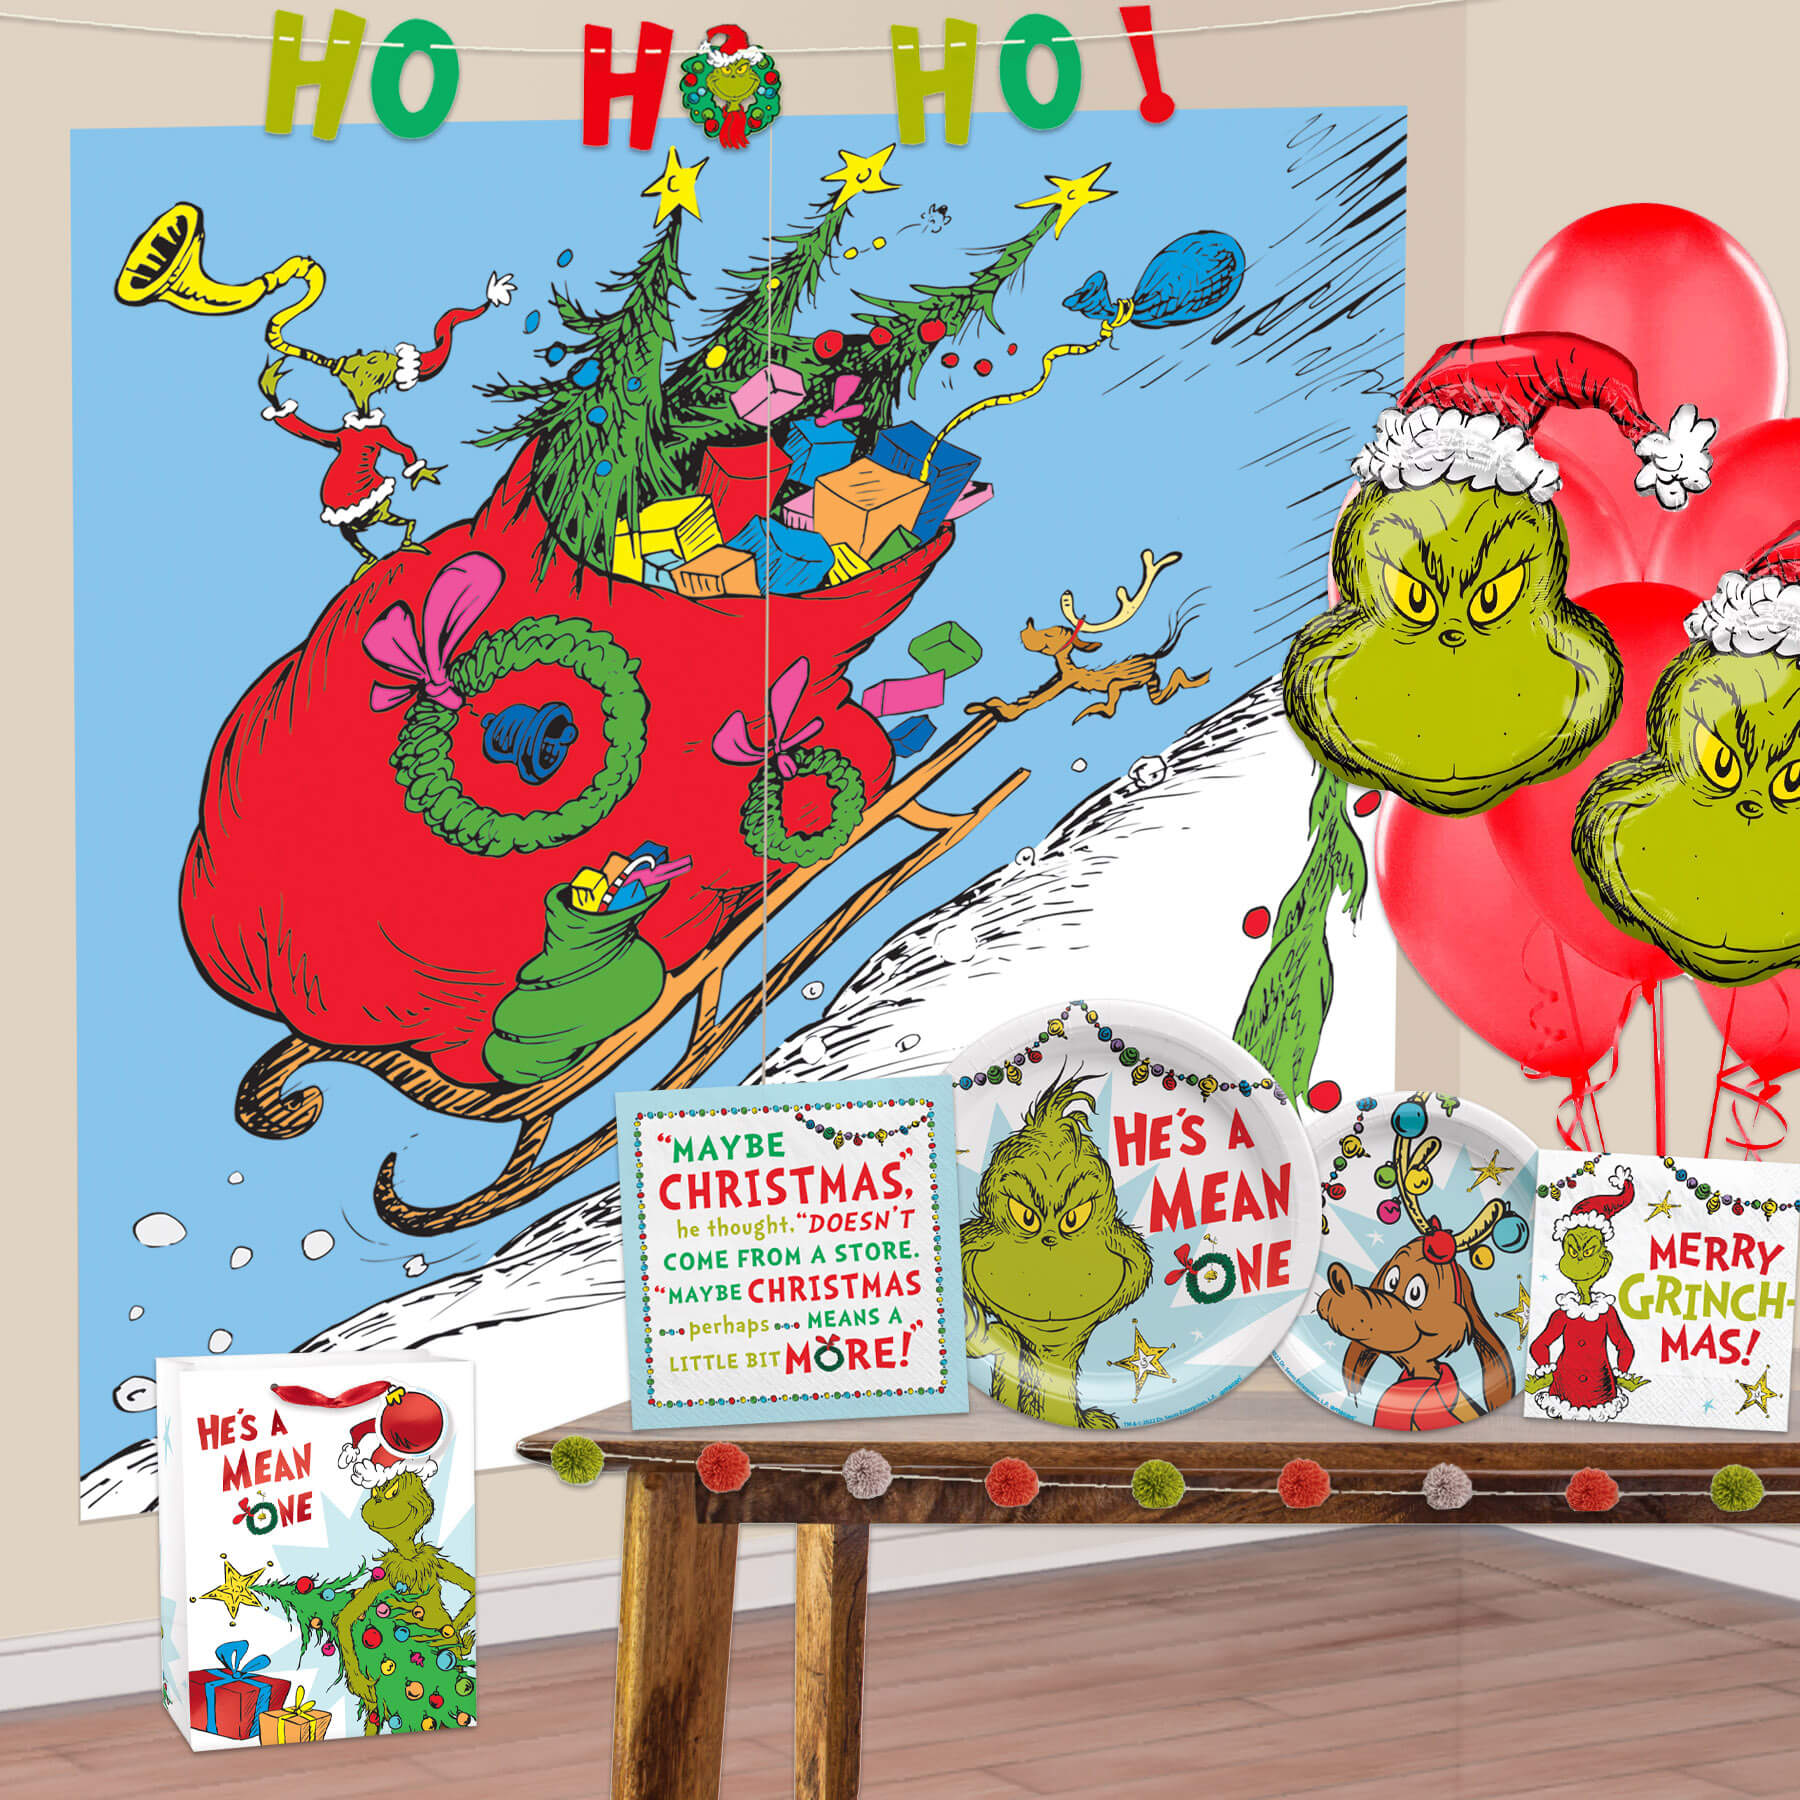 the grinch wall decorations with plates, napkins, and balloons